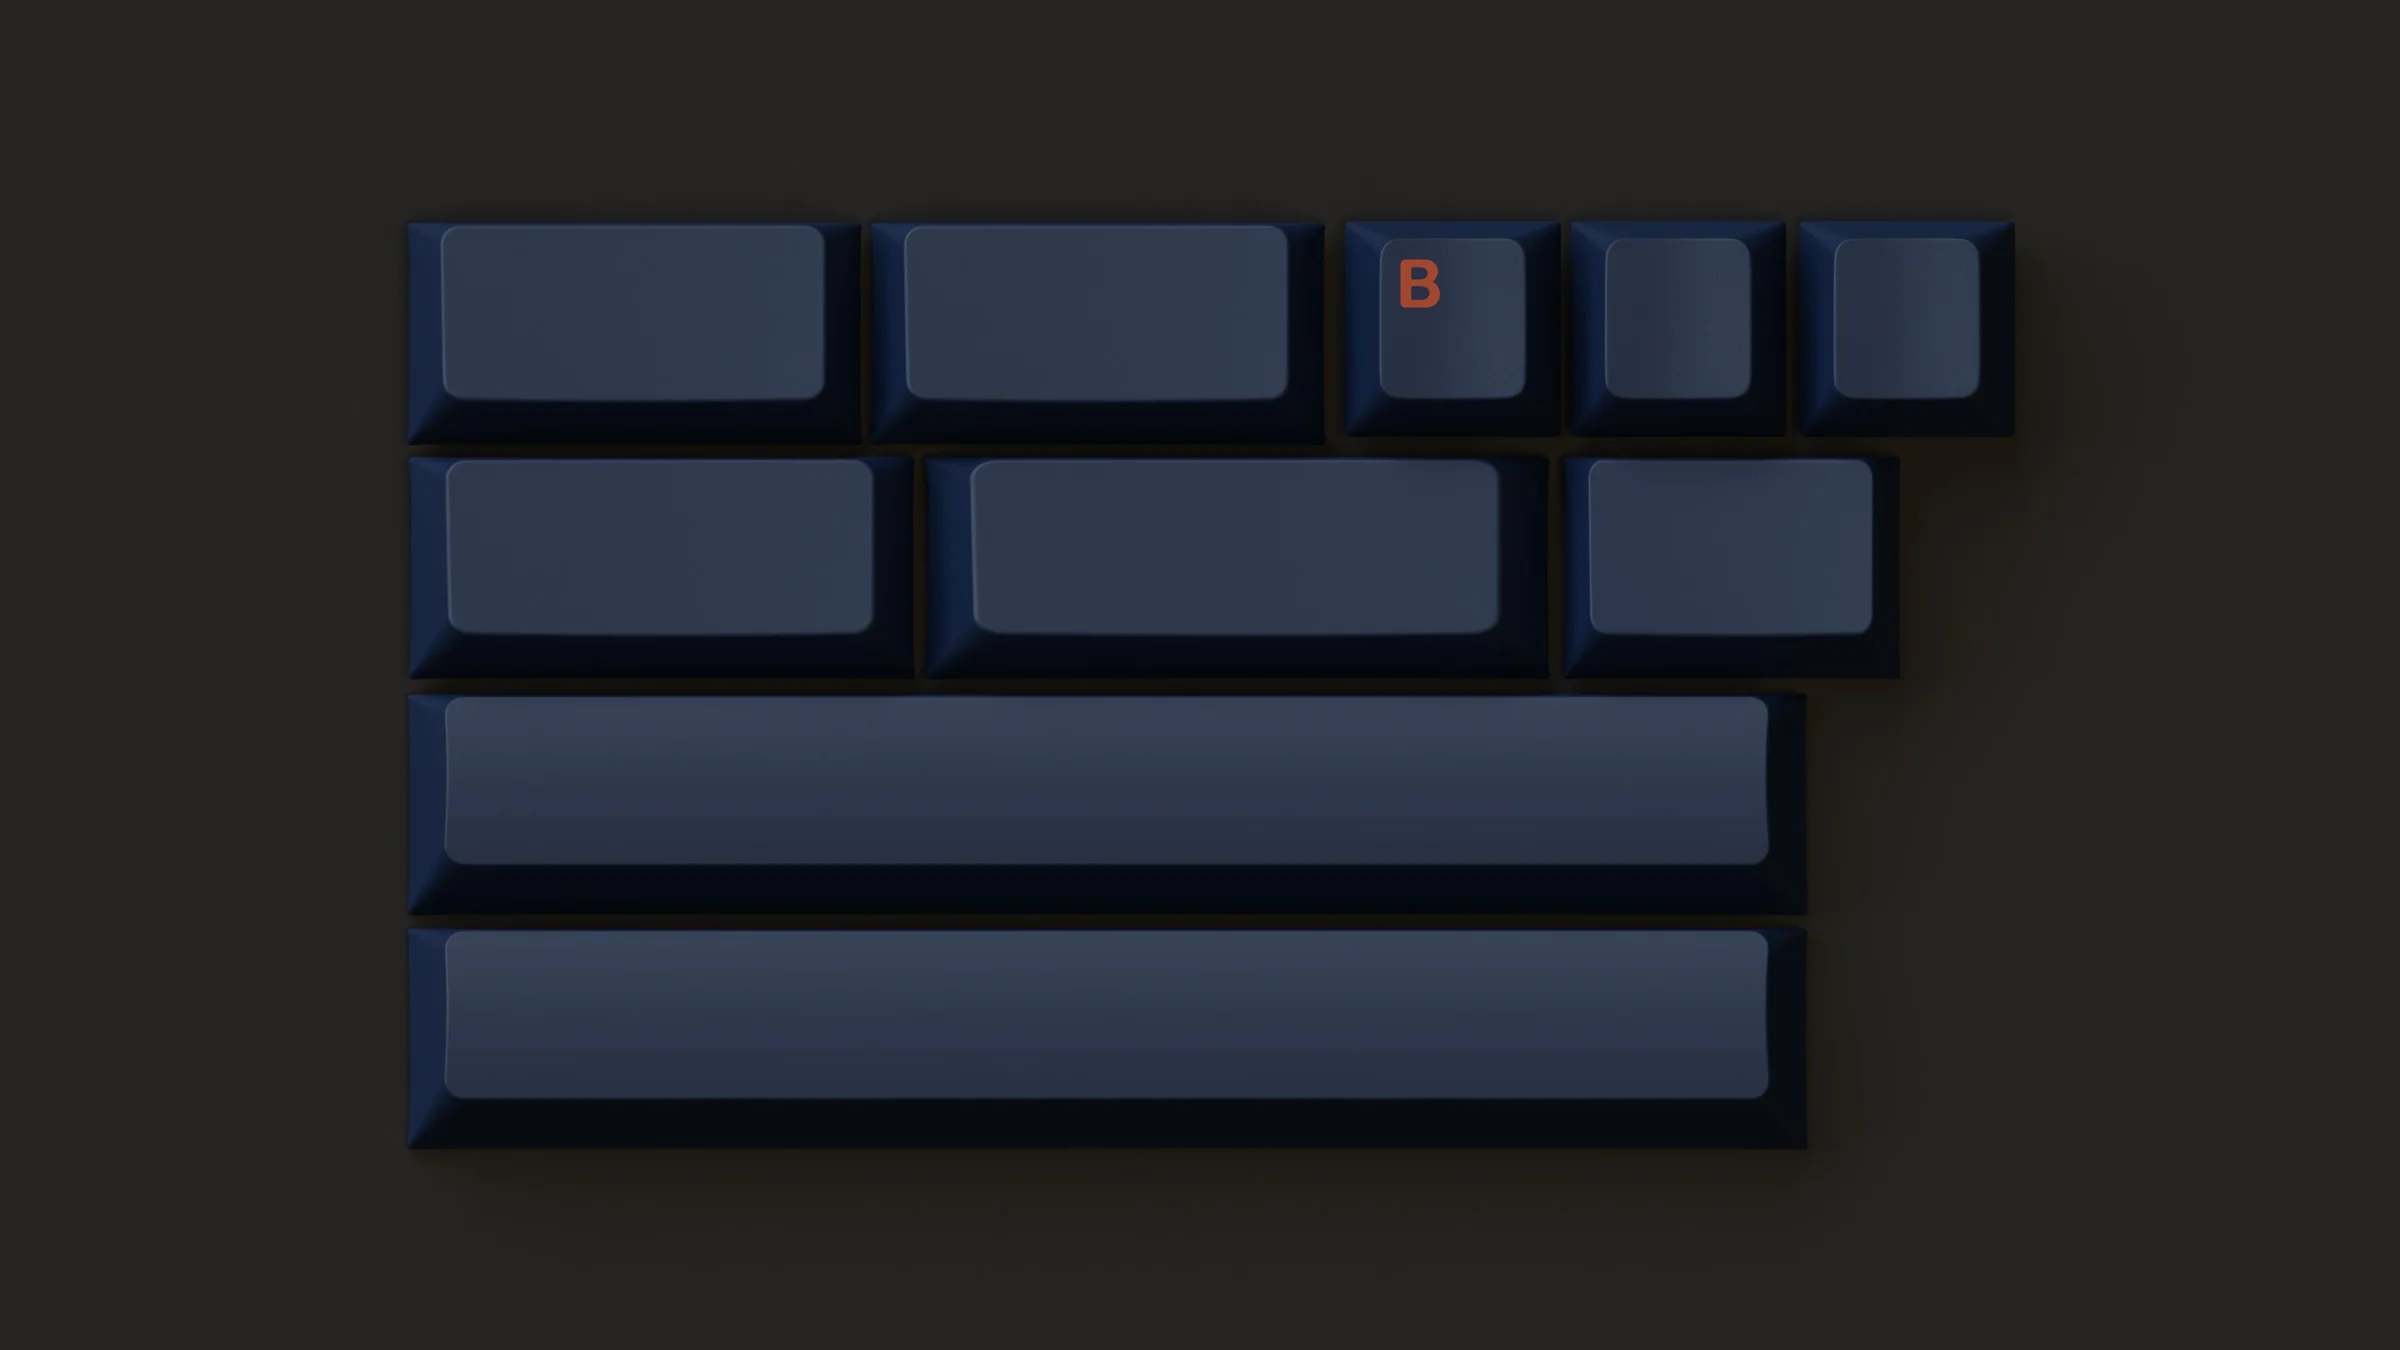 [In Stock] GMK Sunset Surfing Keycap